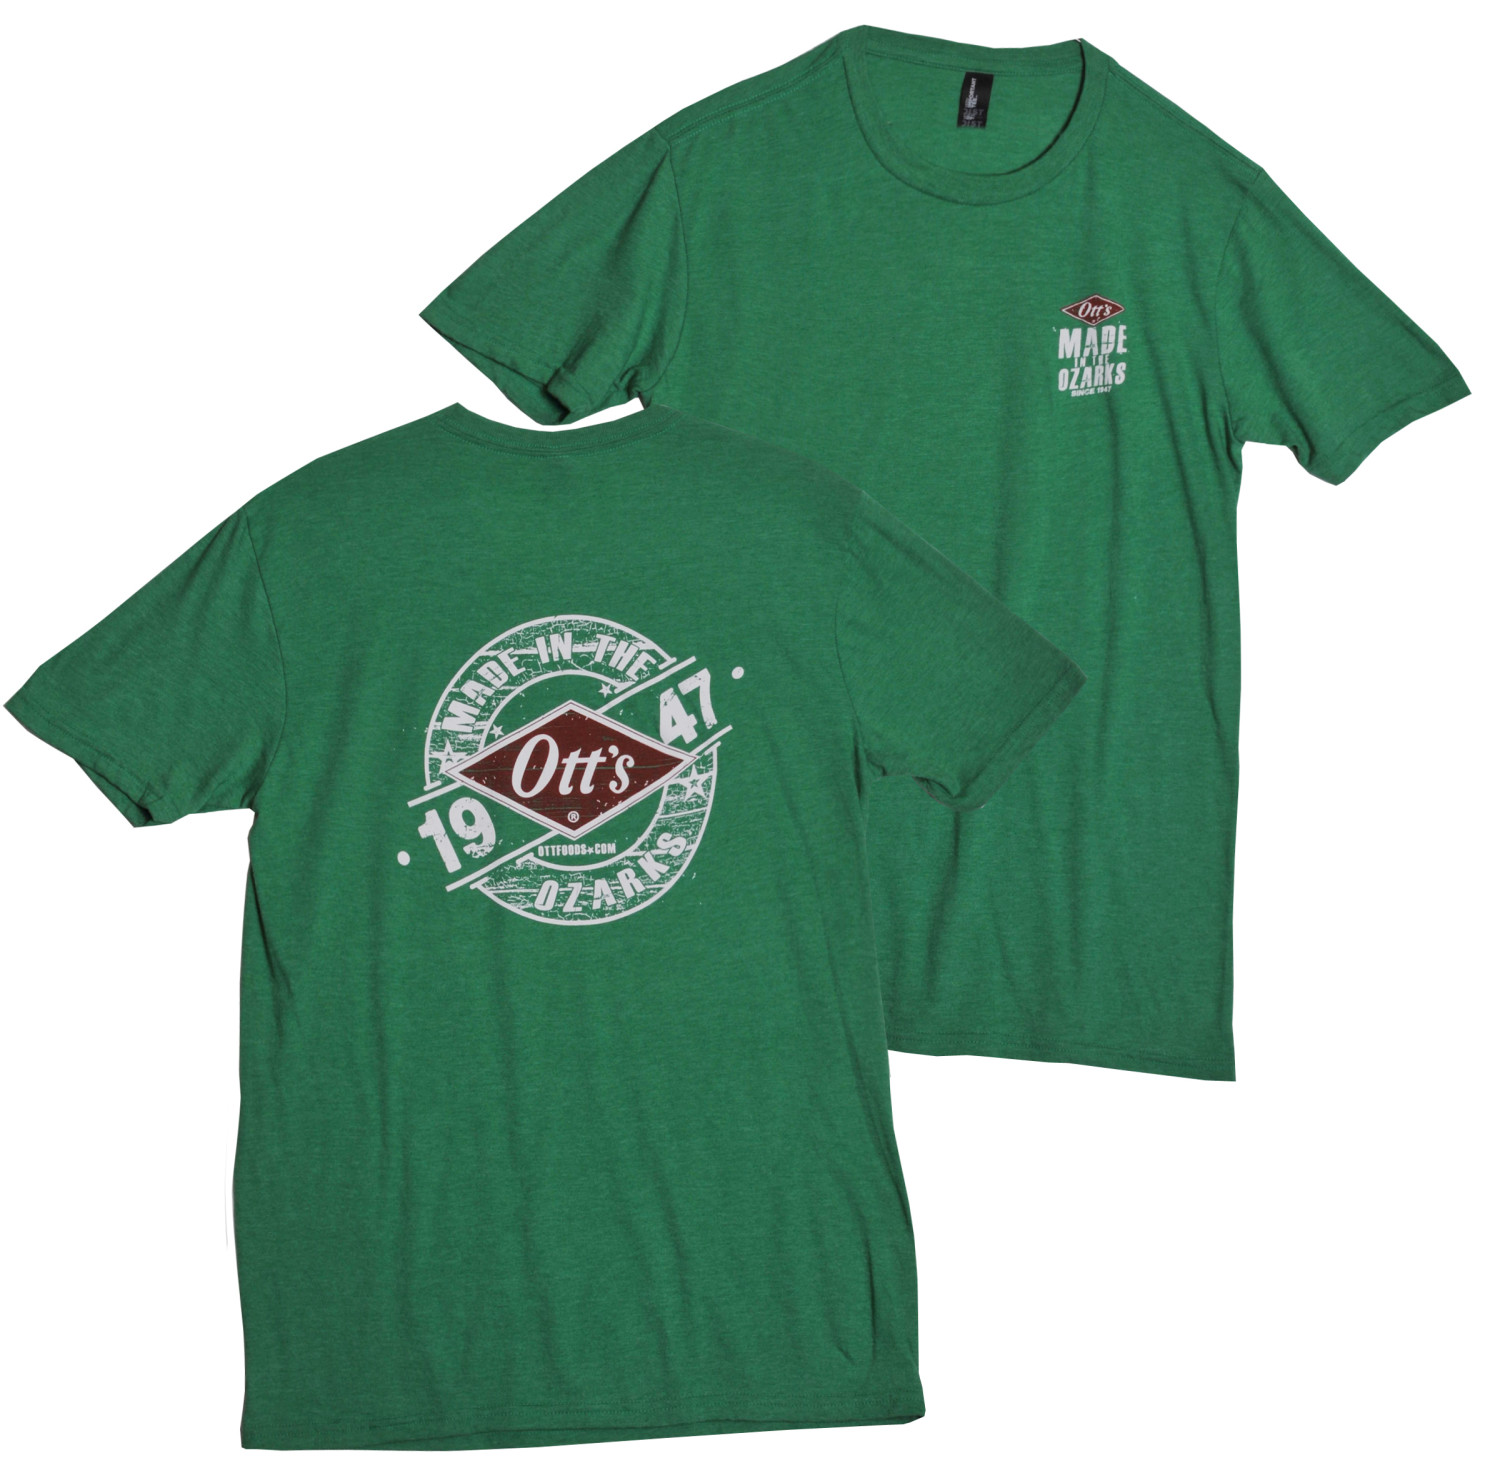 Ott’s “Made in the Ozarks” T-Shirt – Ott Food Products